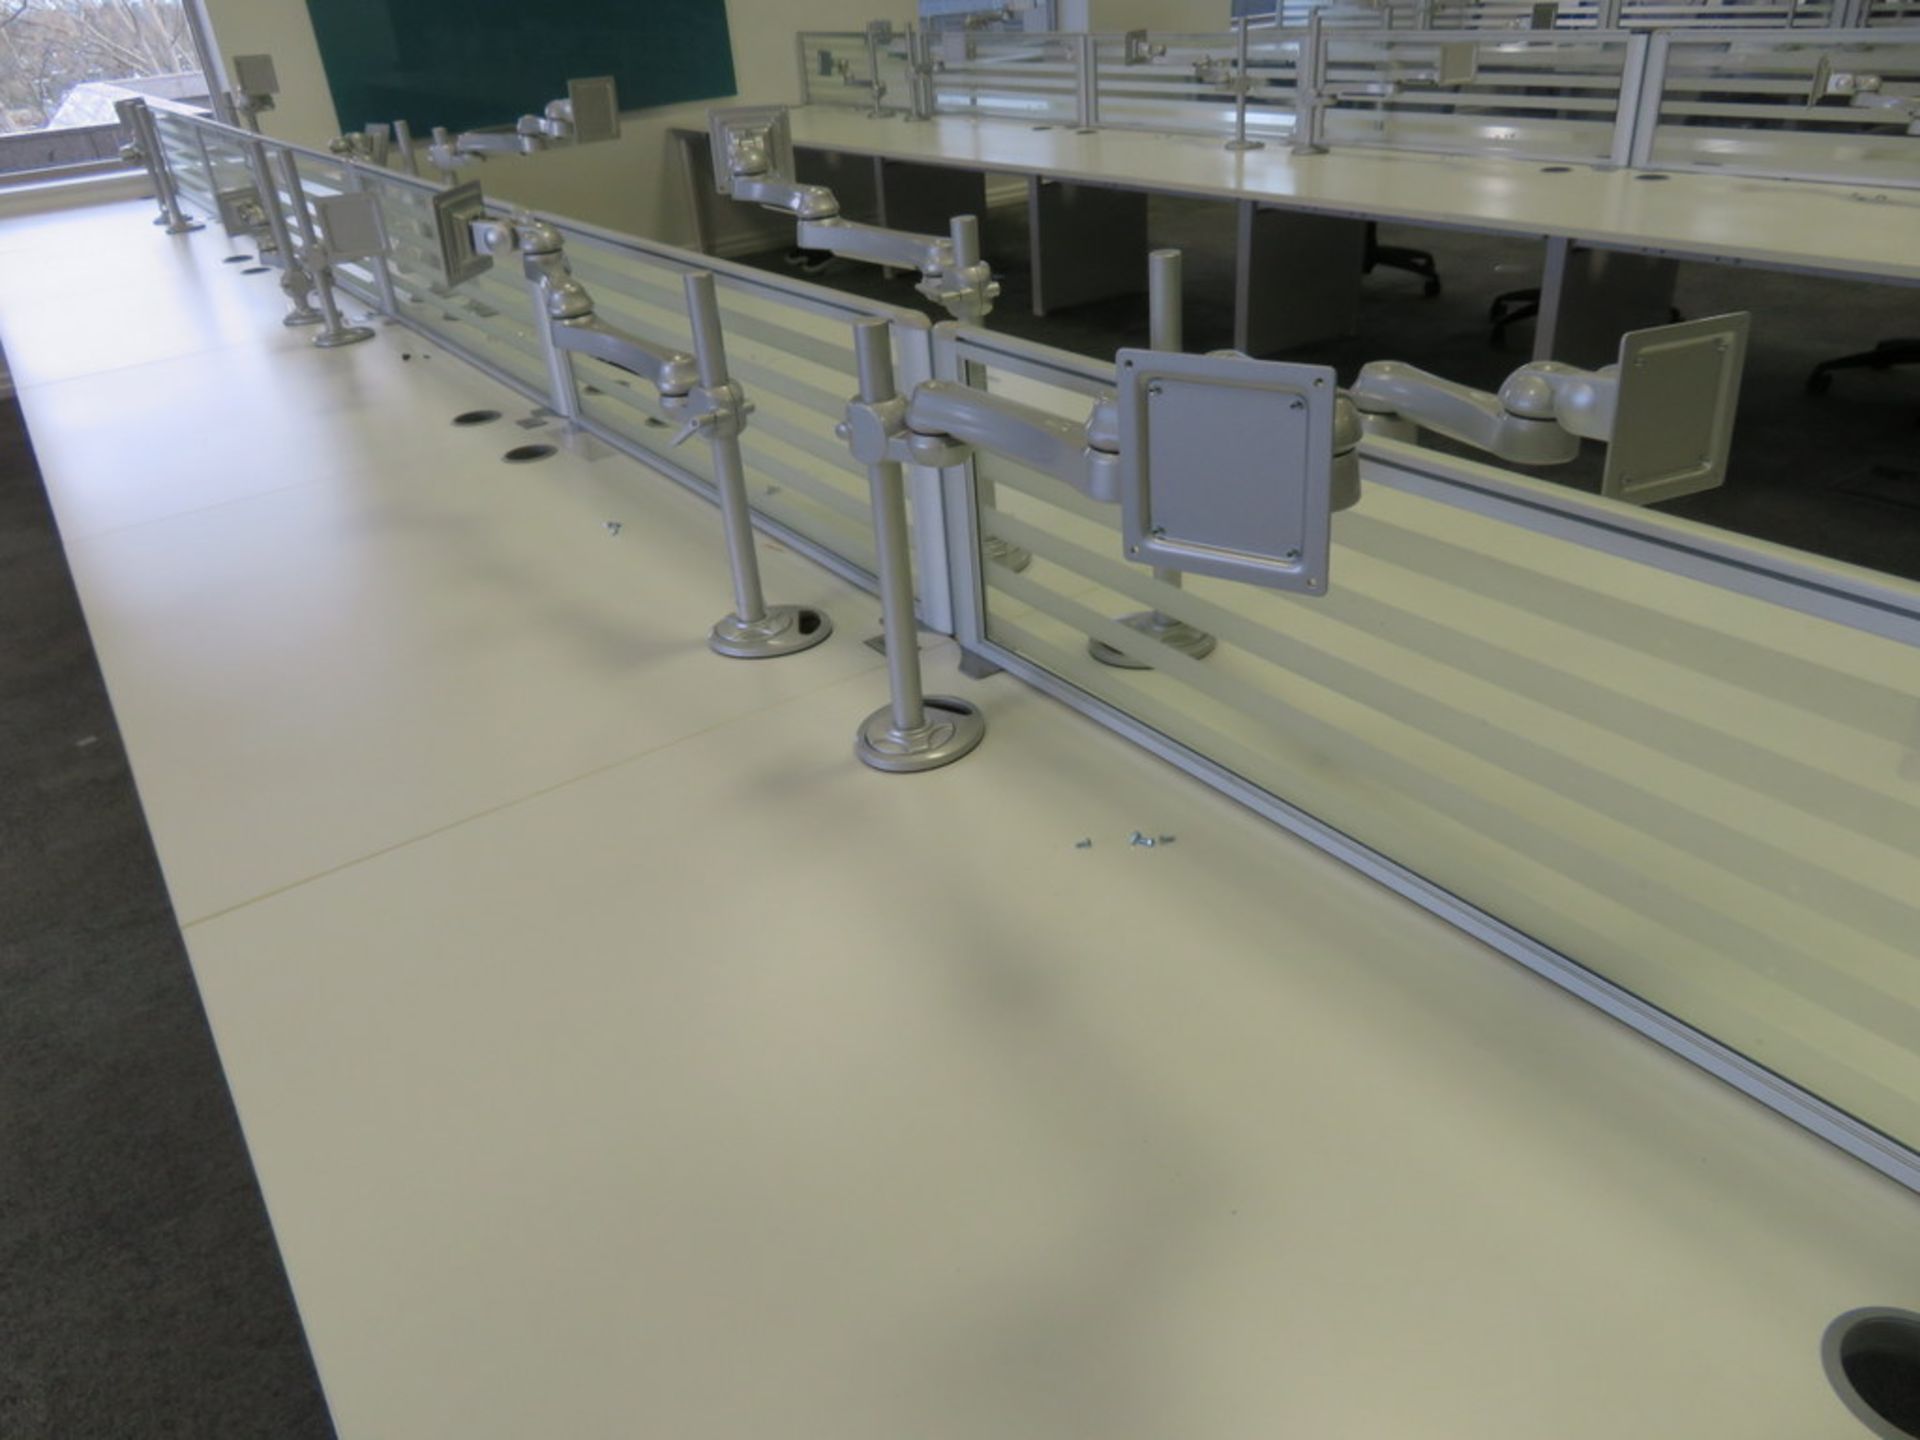 12 Person Desk Arrangement With Dividers, Monitor Arms & Storage Cupboards. - Image 4 of 4